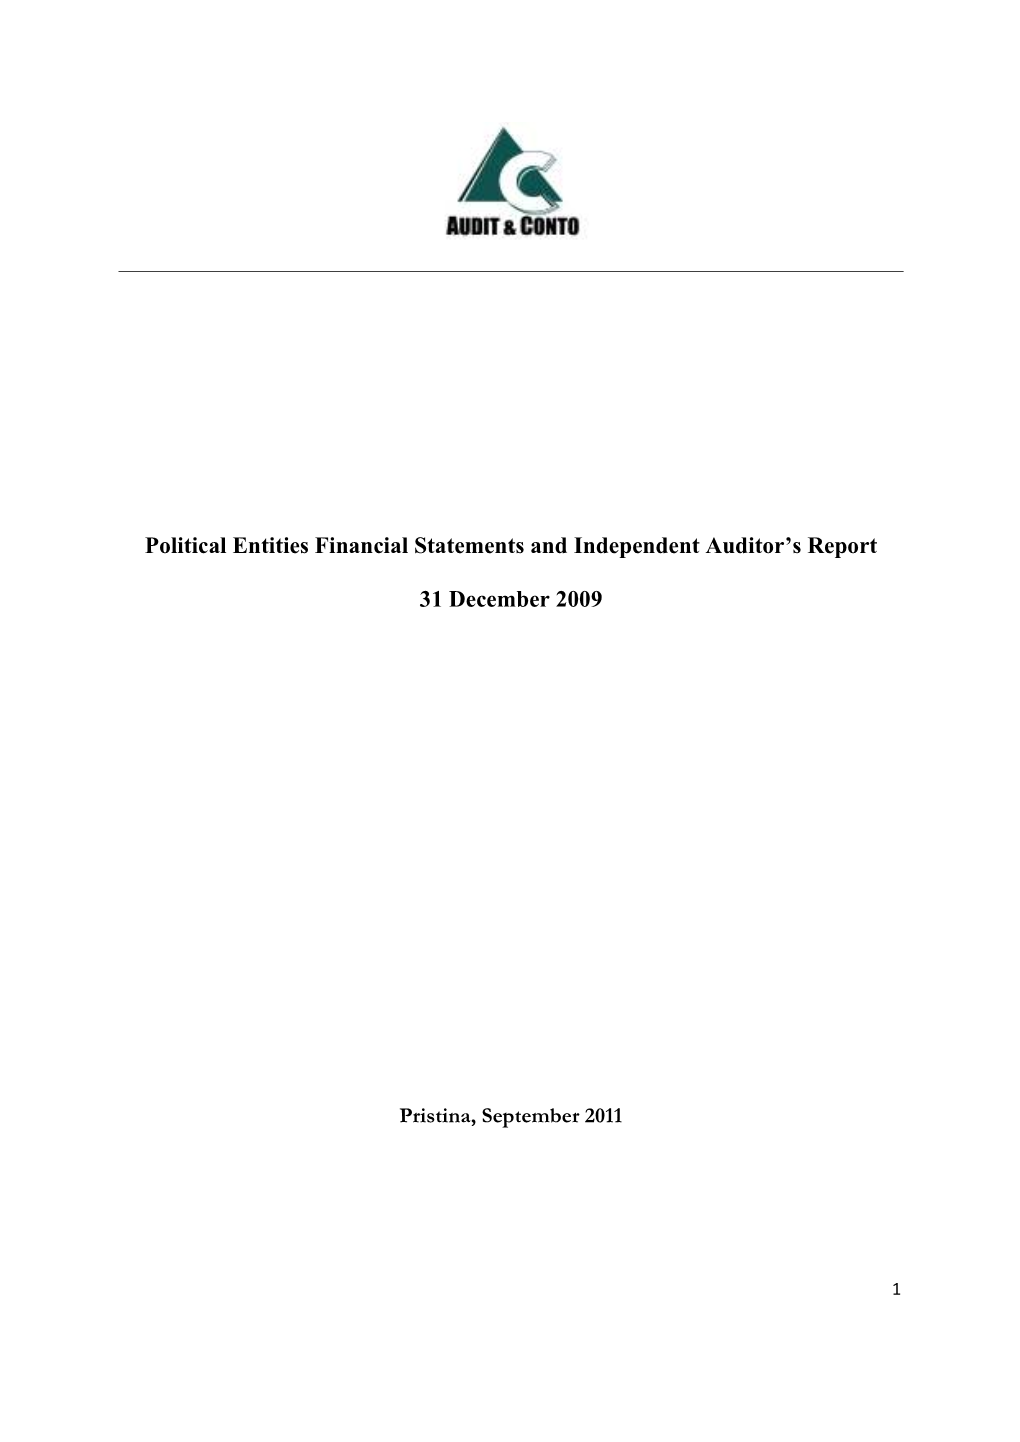 Political Entities Financial Statements and Independent Auditor's